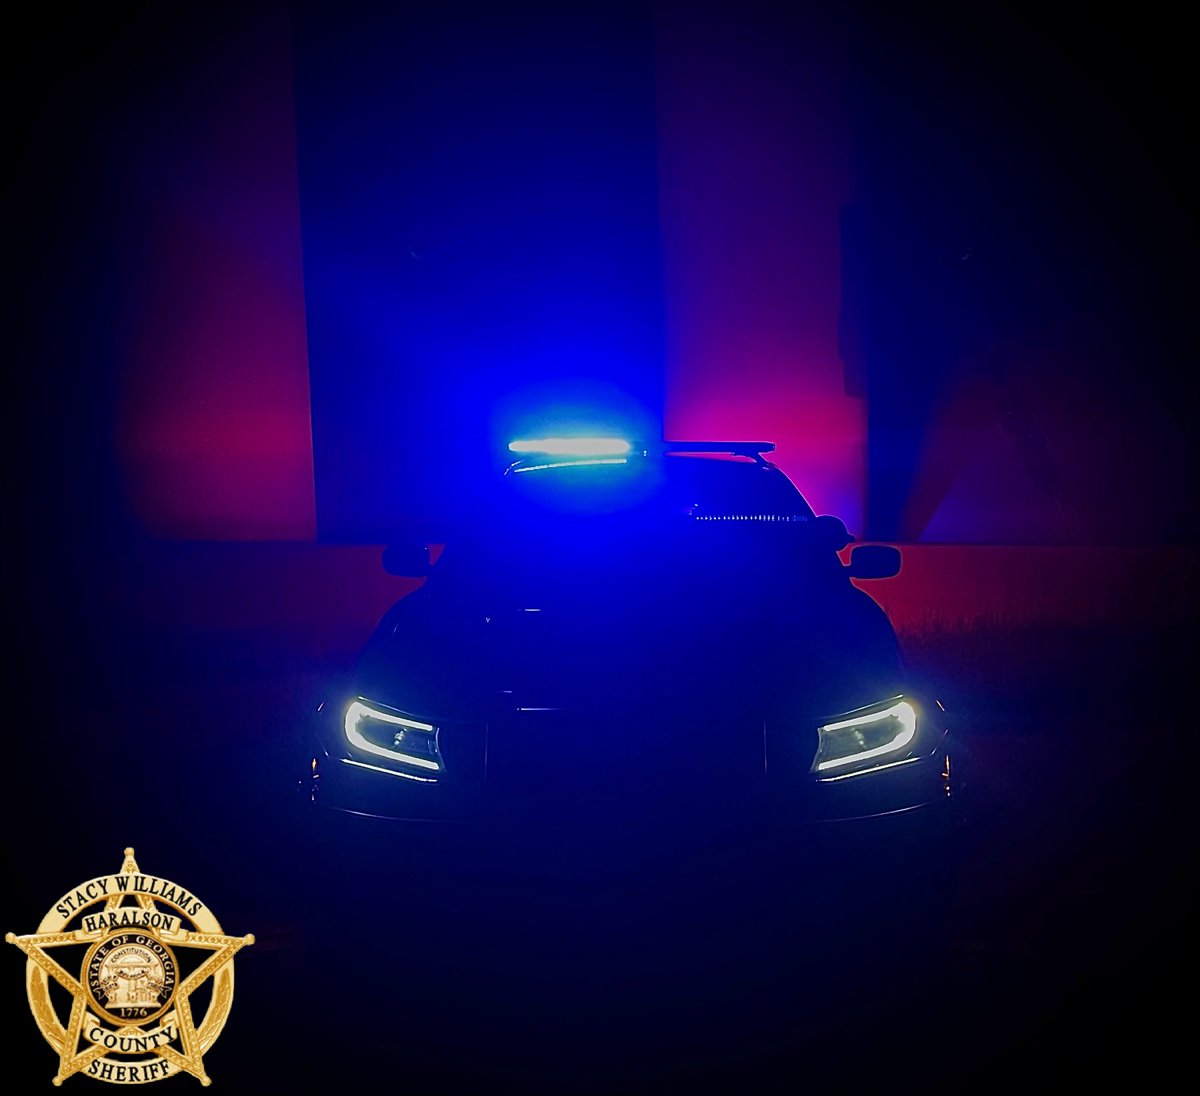 Good Sunday evening folks, we hope everyone had a great day! We are ending the weekend with this cool photo by Deputy J Chandler. #GoodnightHaralson #NewWeek #NightShiftDeputy #HCSO